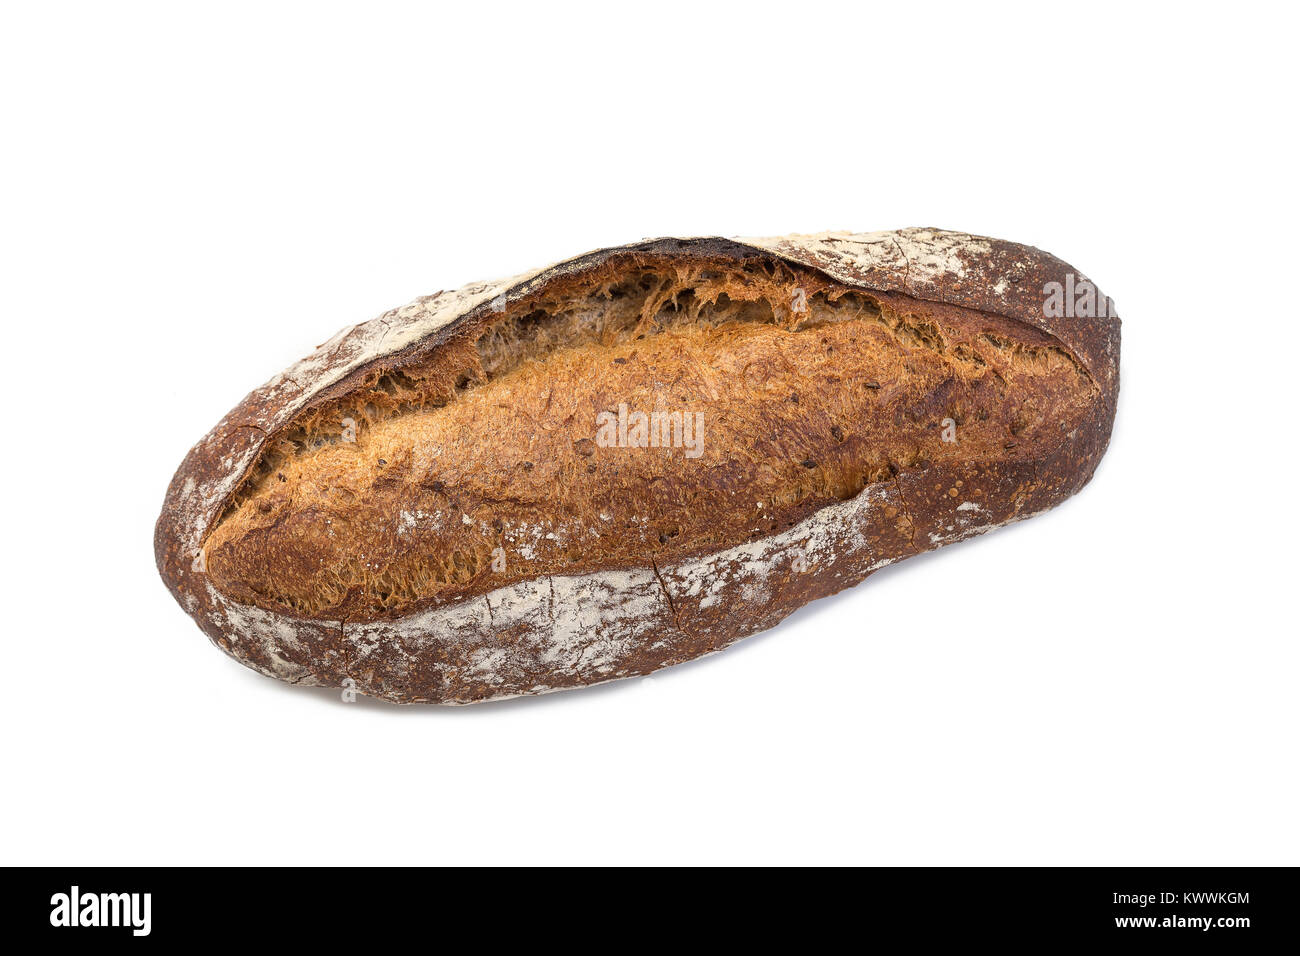 Rustic bread on white background Stock Photo